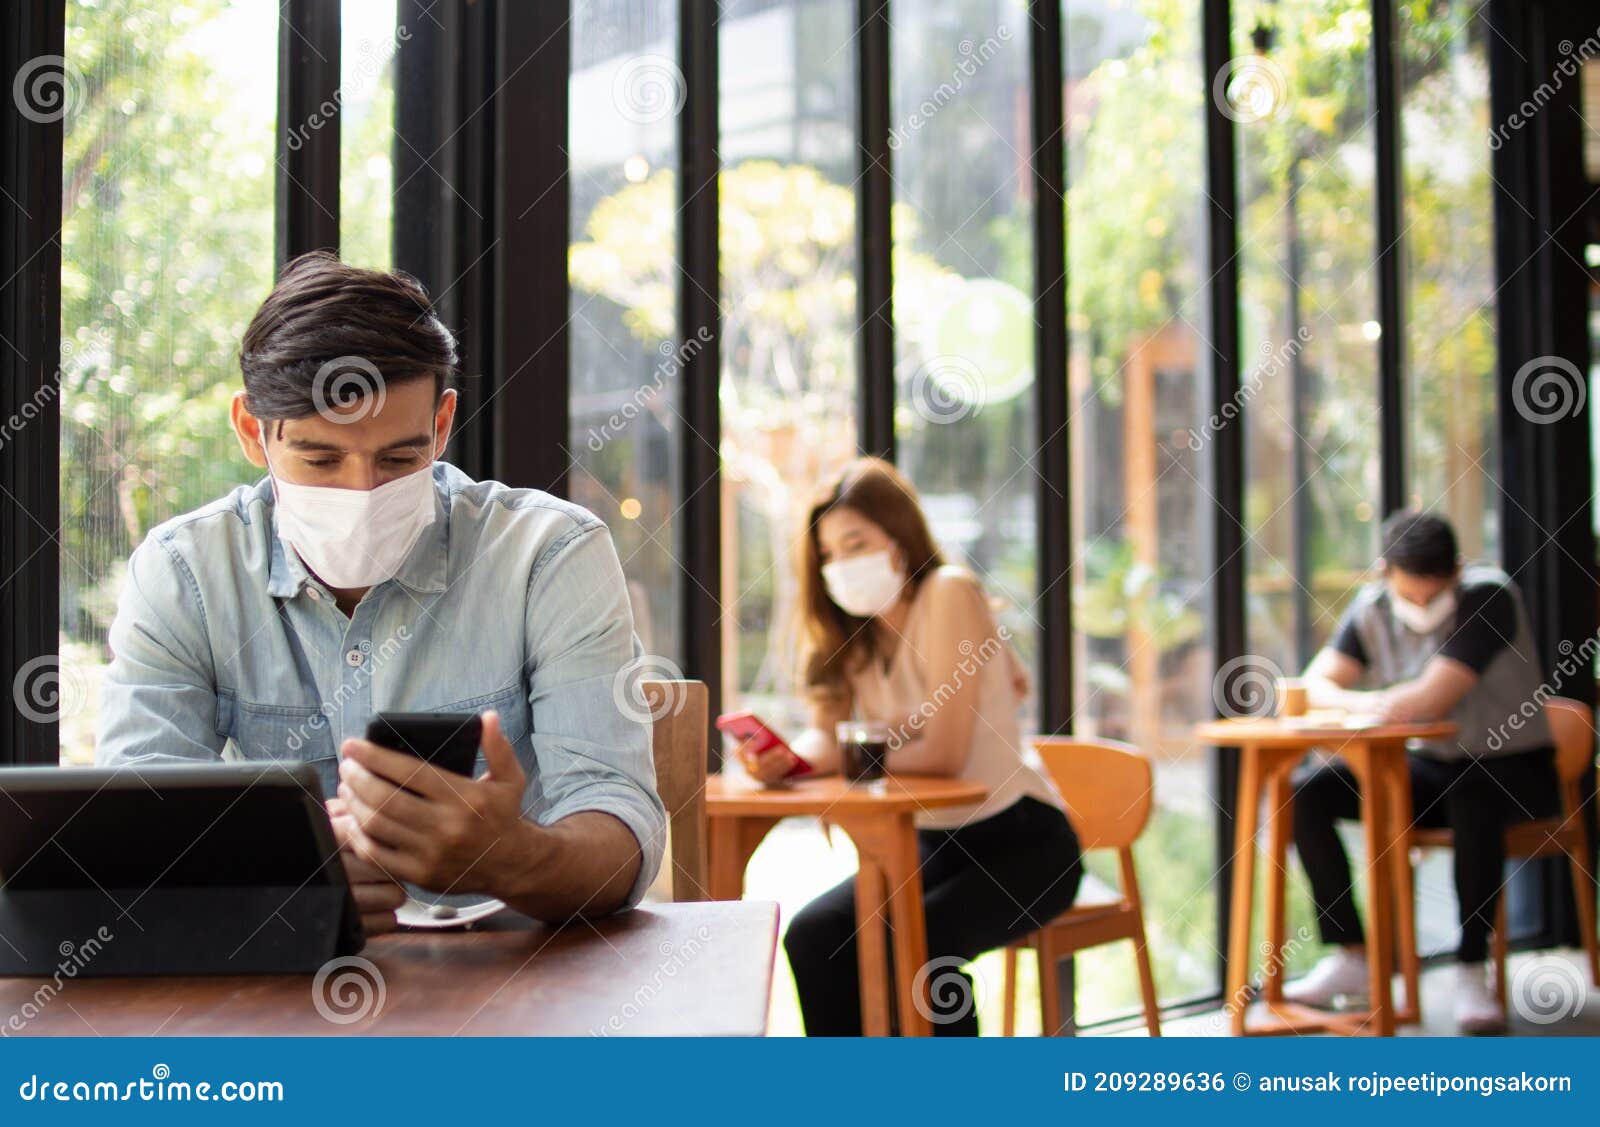 people wearing surgical masks are sitting in restaurants, coffee shops. social distancing concept healthcare pandemic. public